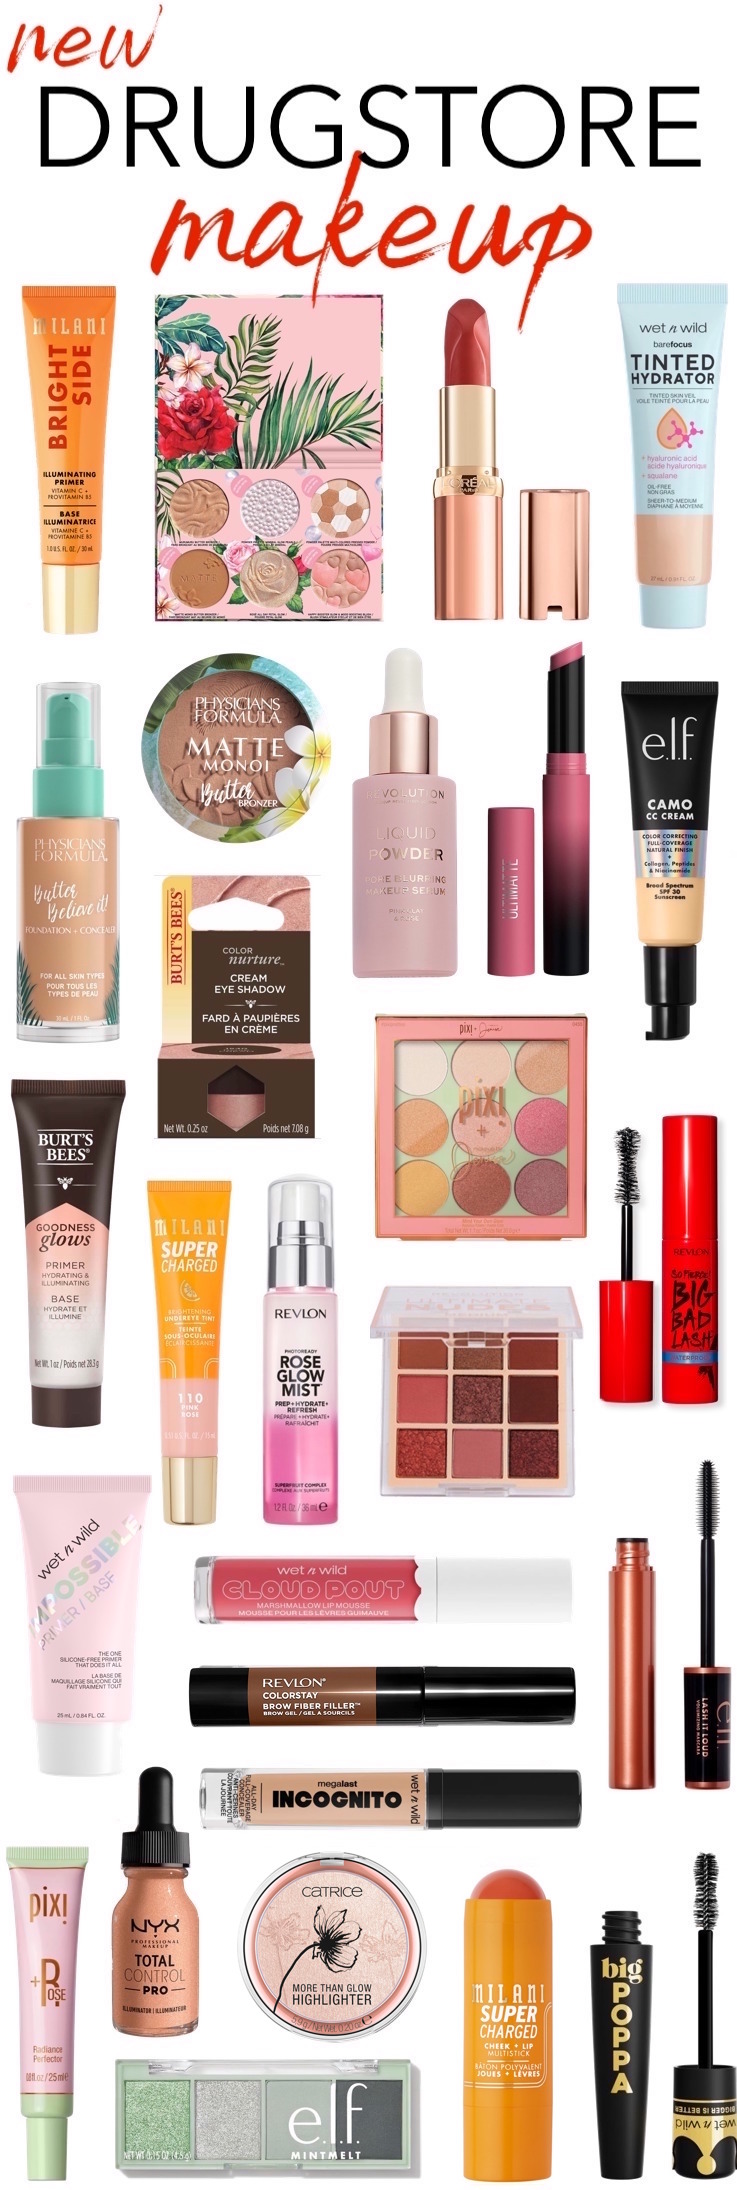 NEW Drugstore Makeup Releases For 2021 You Need to Check Out